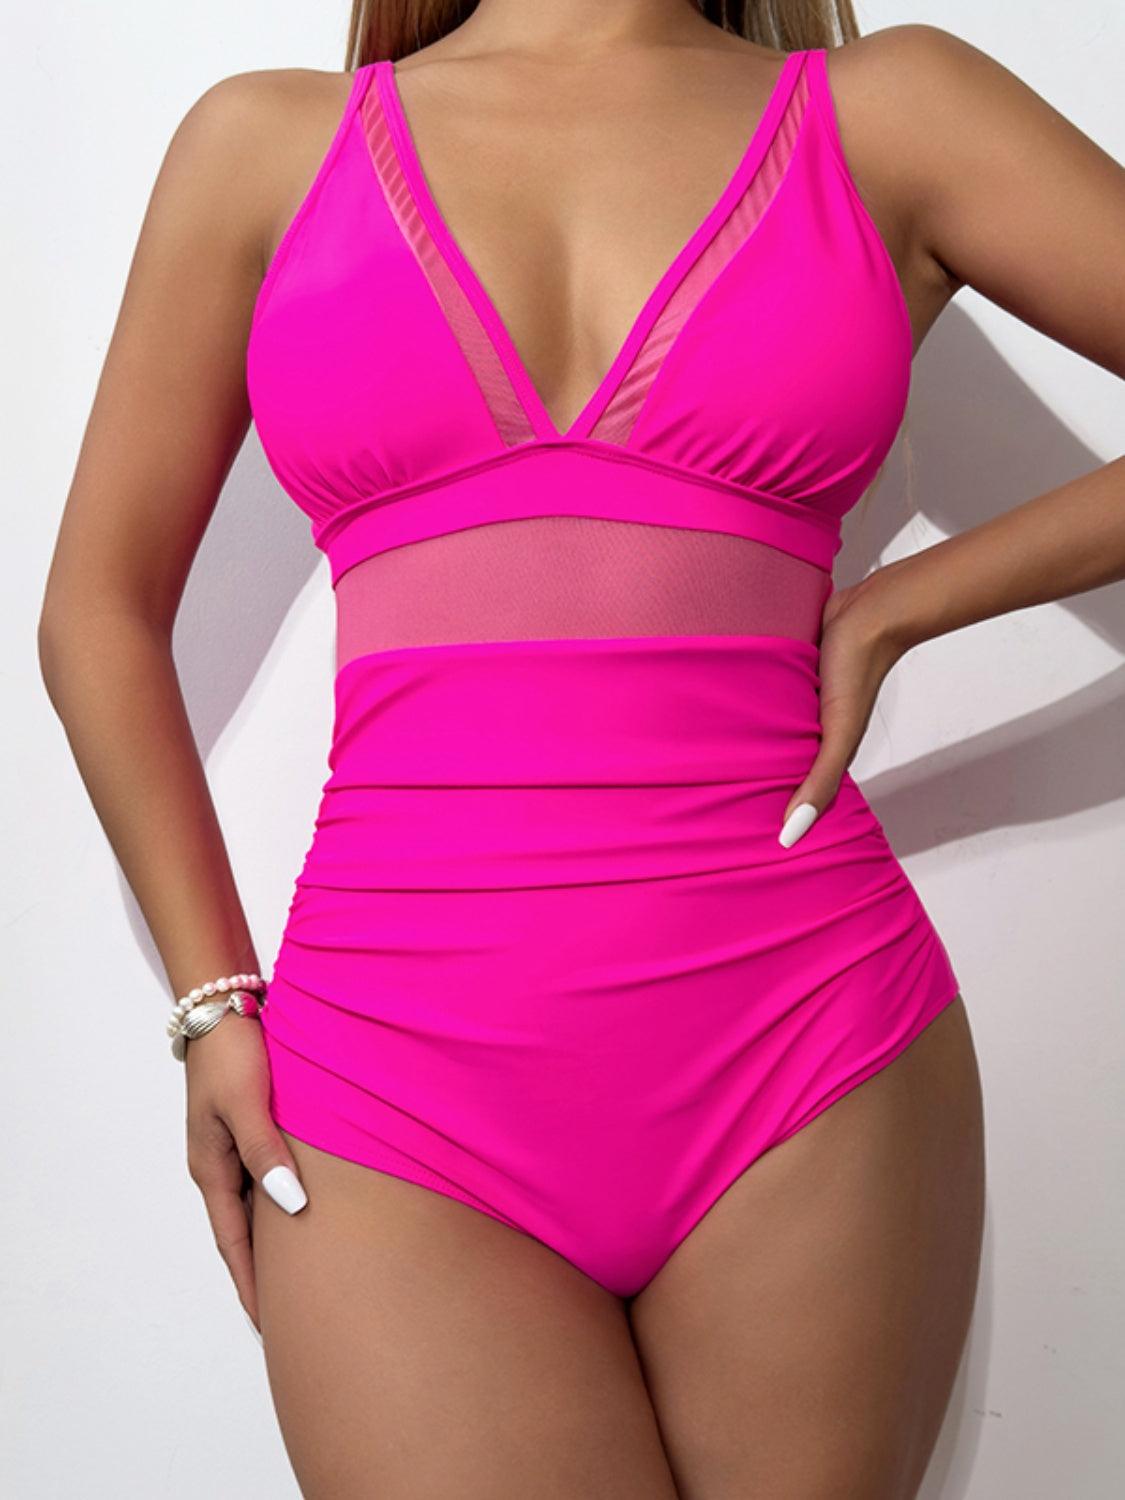 V-Neck One-Piece Swimwear in 4 Colors - Olive Ave